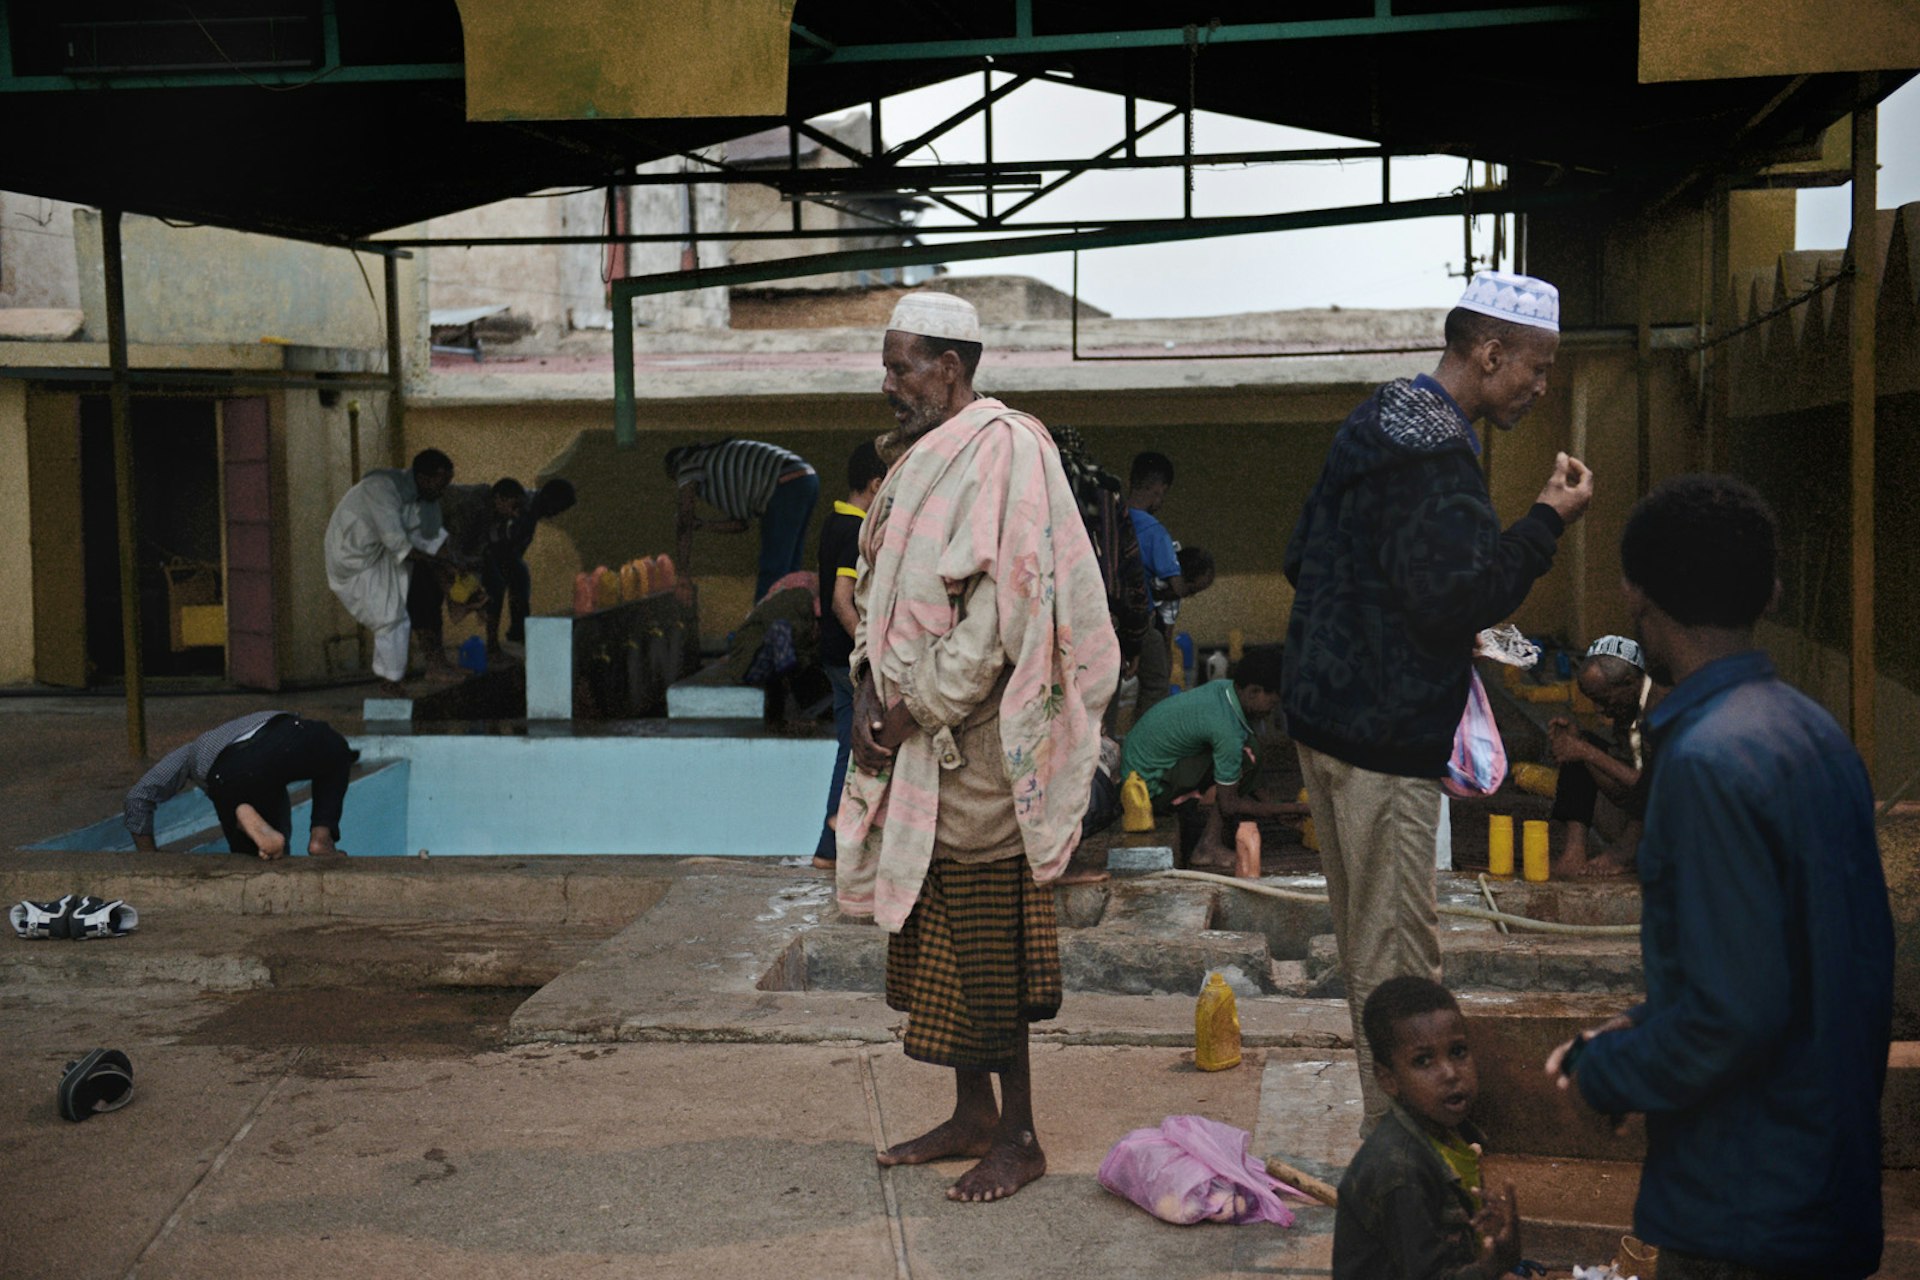 Ethiopian Muslims perform Wuḍū at a mosque in Harar, Ethiopia. Wuḍū is an Islamic obligatory procedure for washing parts of body (hands, mouth, ears, head, feet) before prayer.